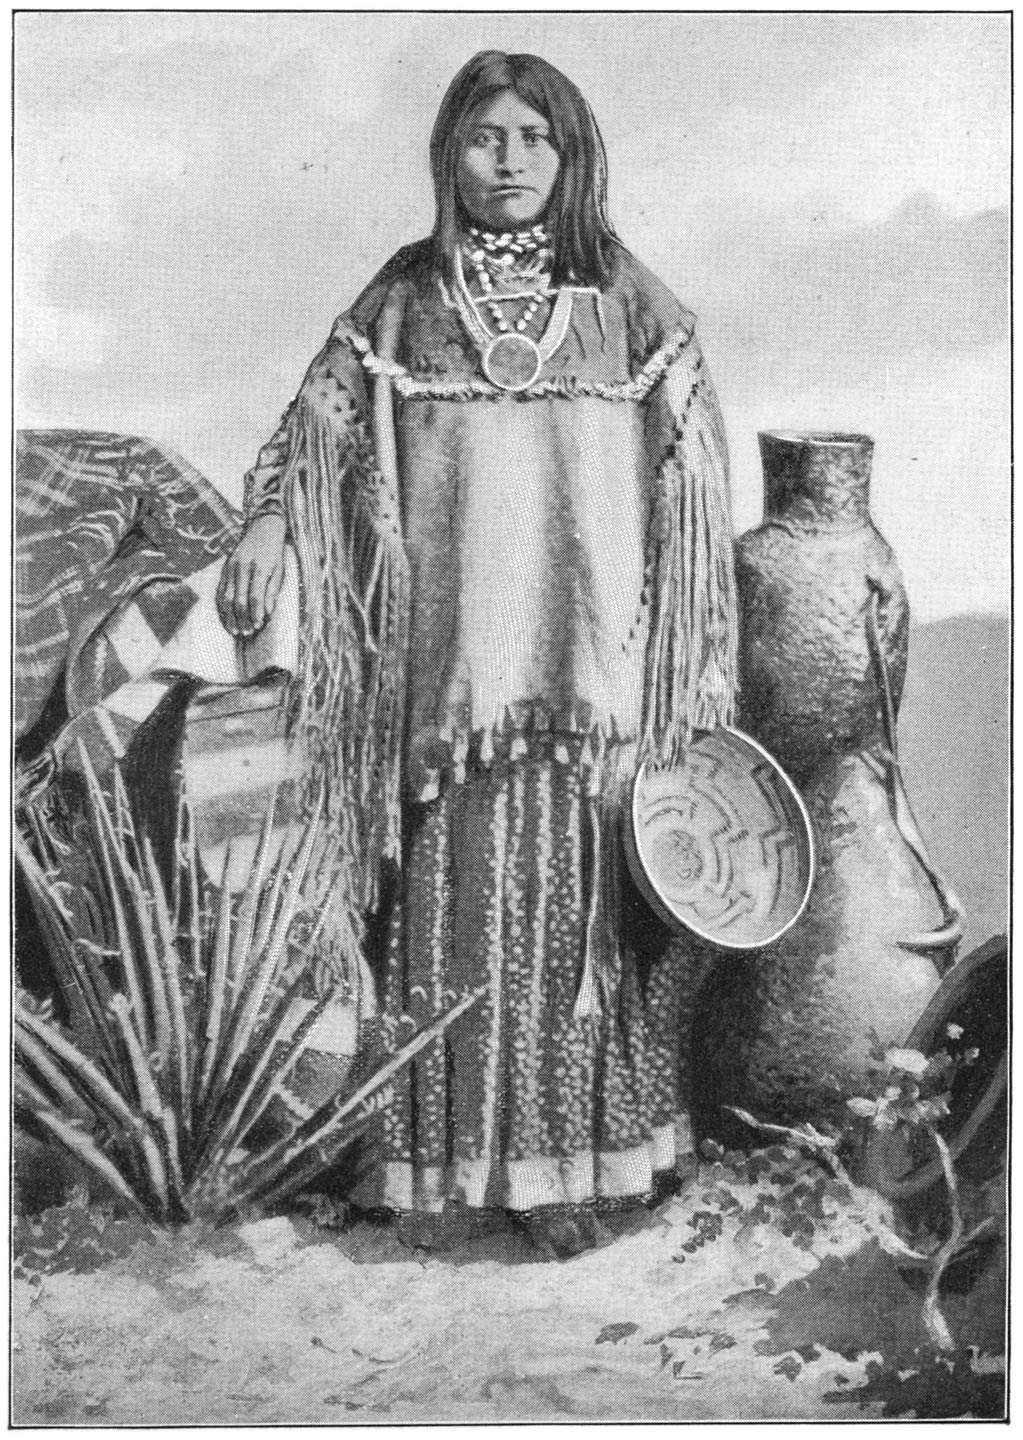 Apache Woman with her Handiwork. Yucca Plant in Foreground